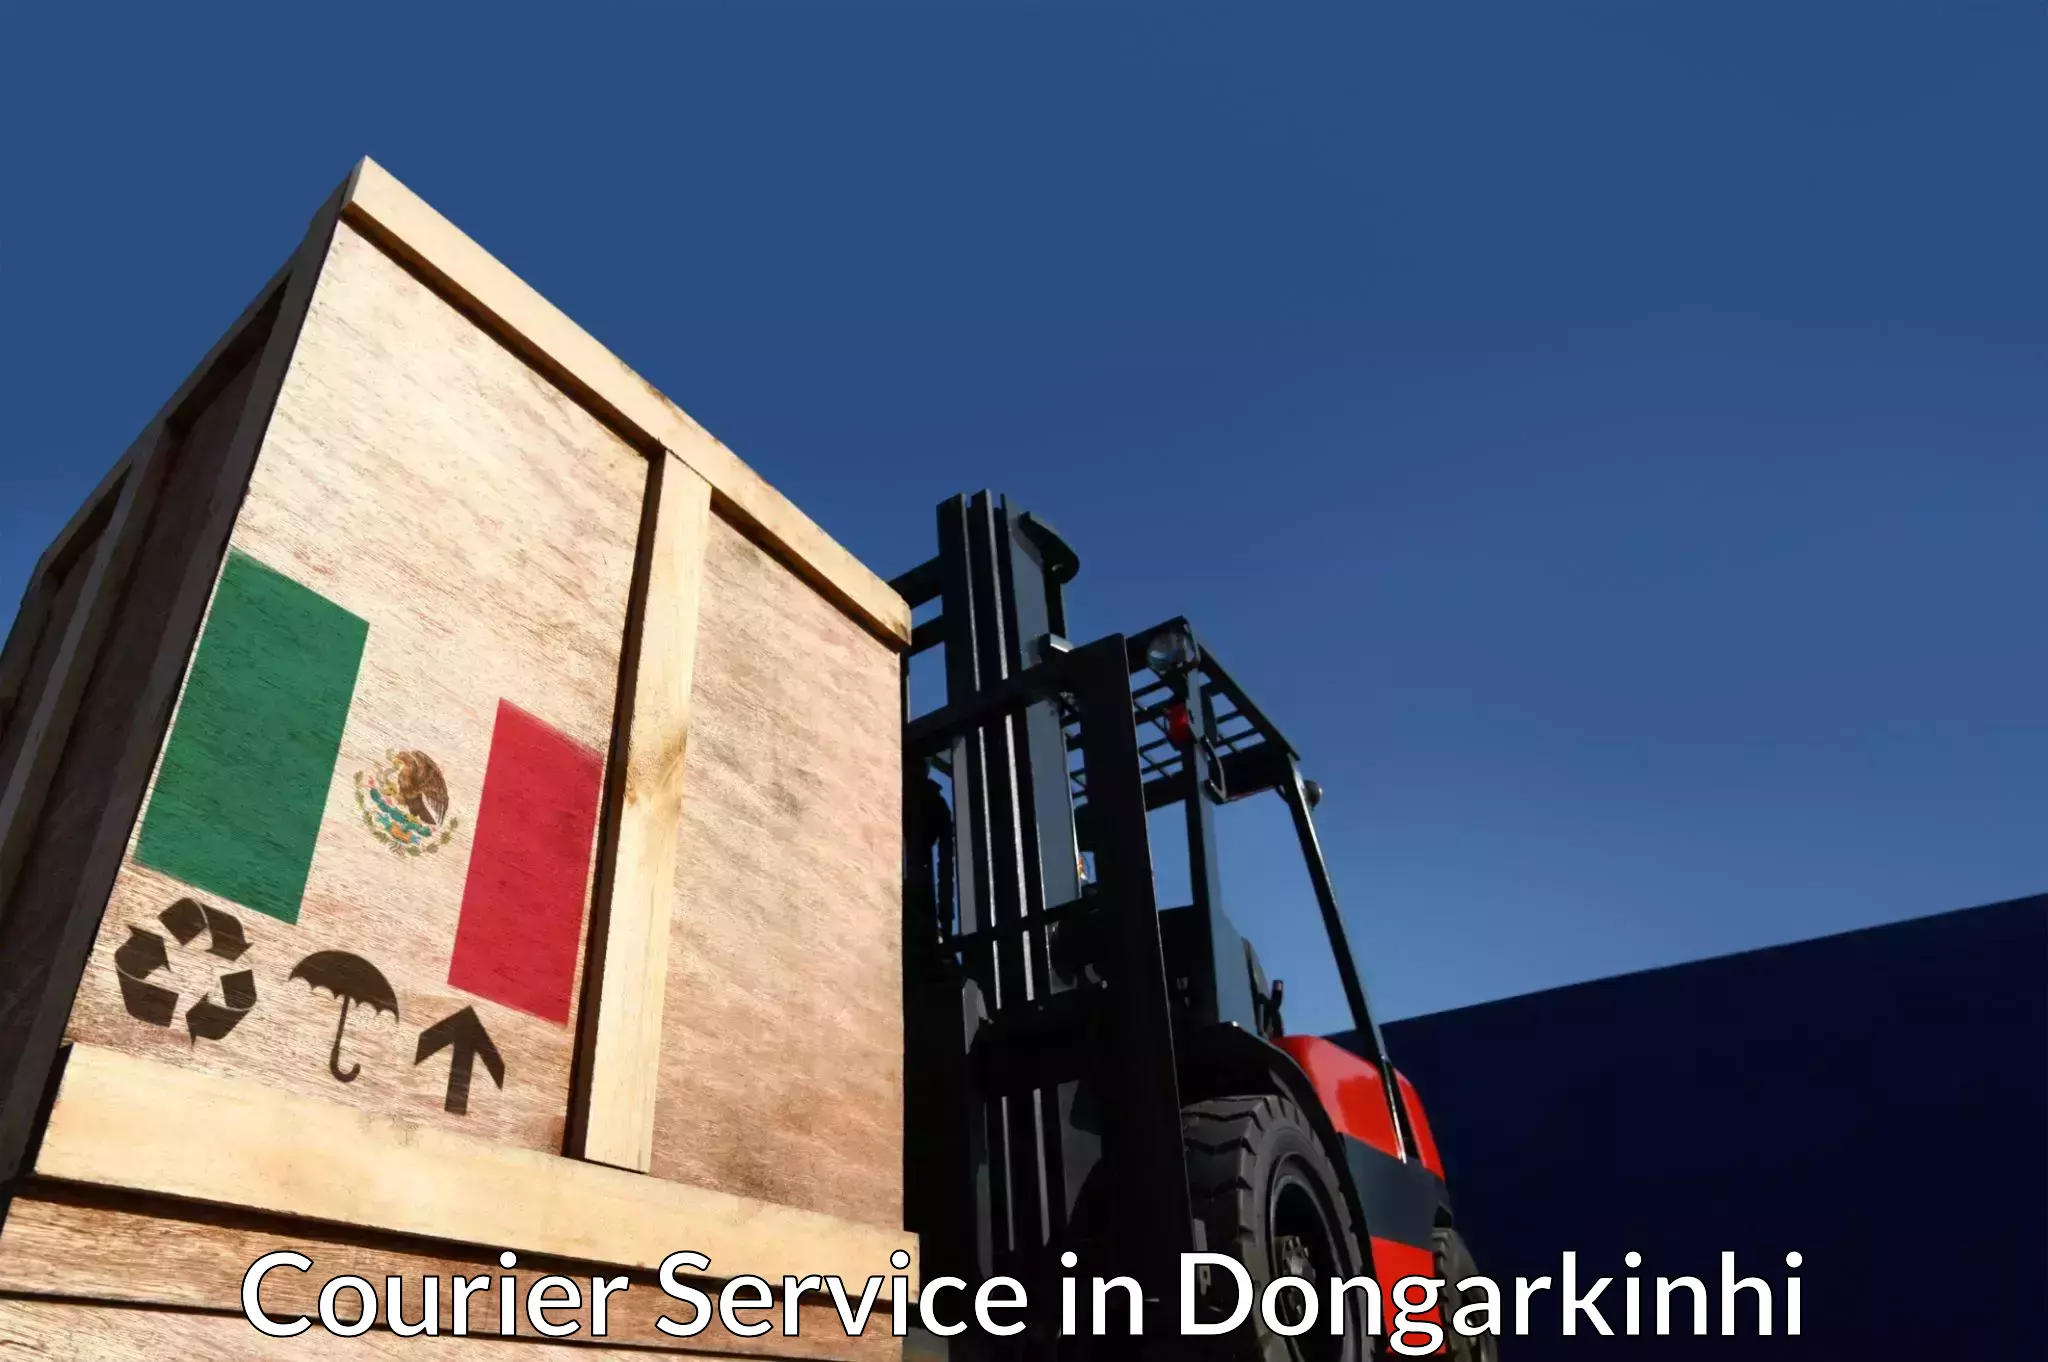 High-speed parcel service in Dongarkinhi